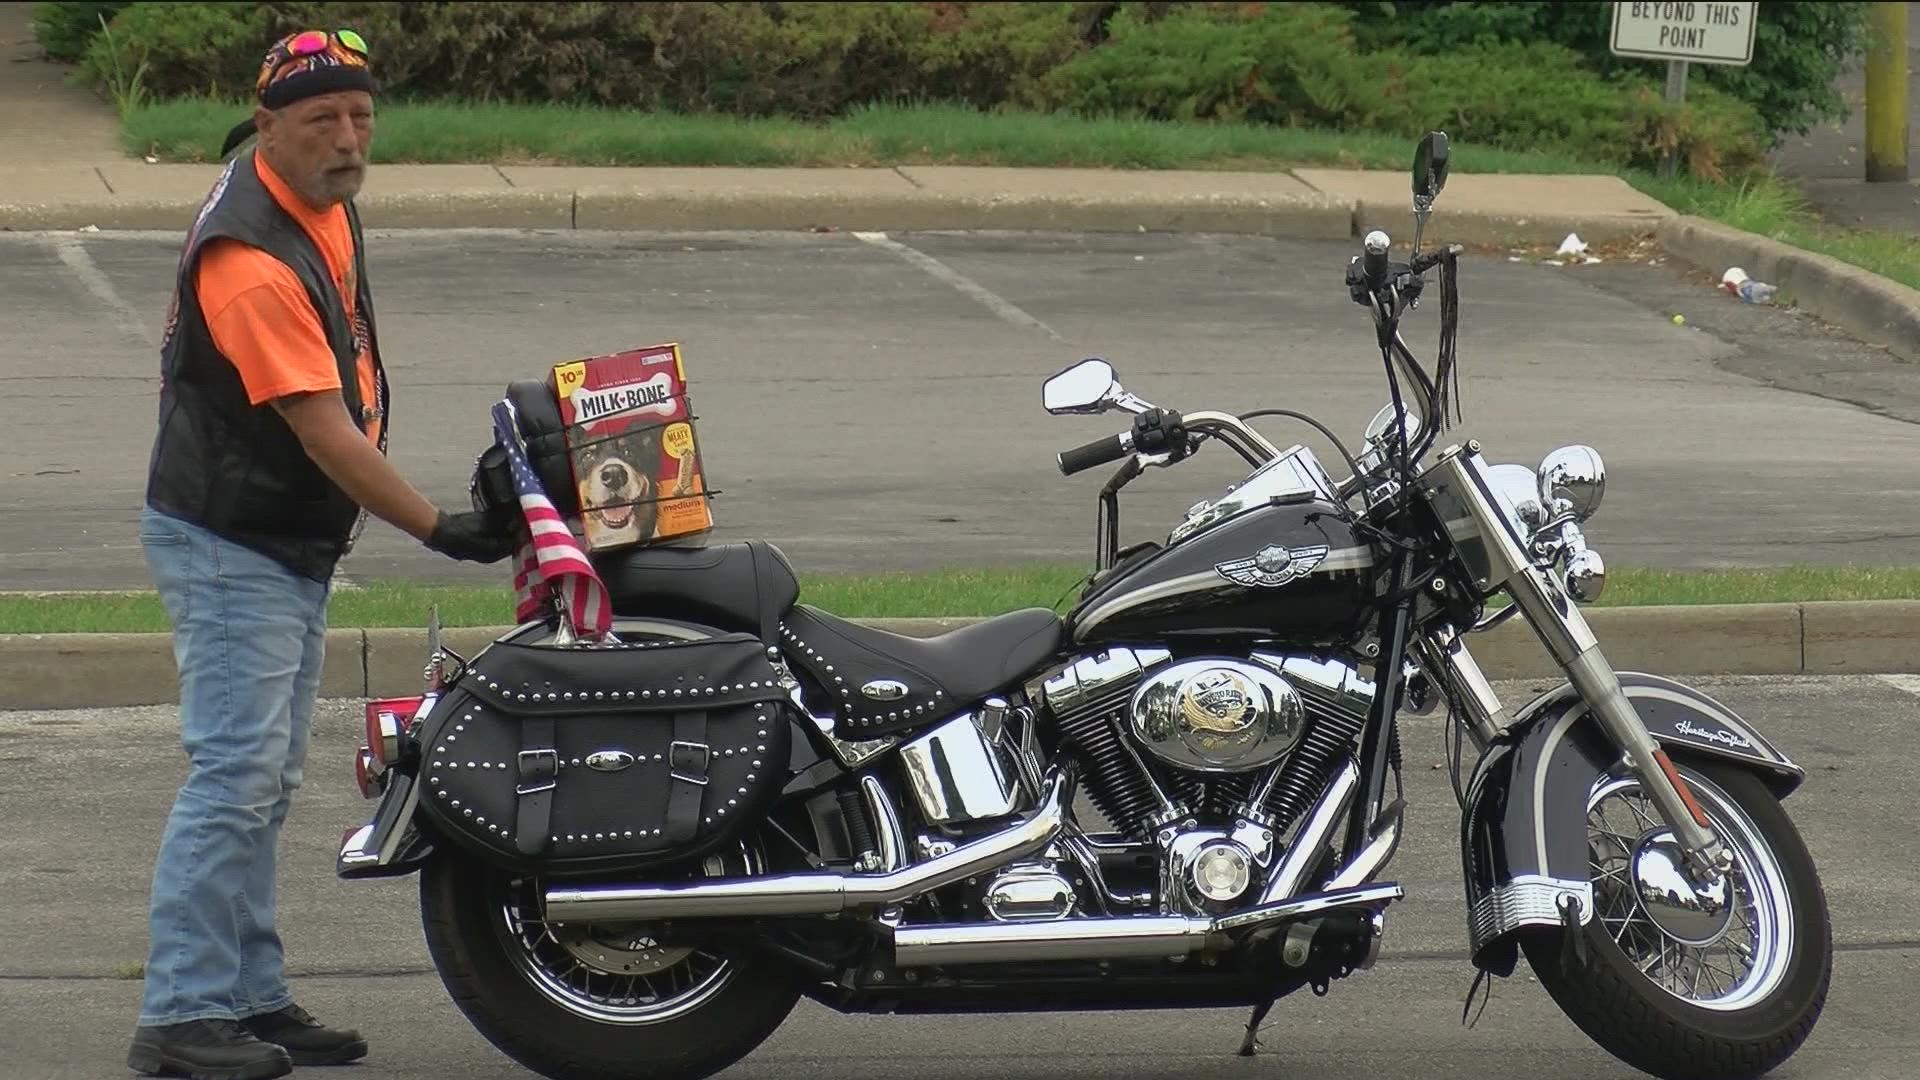 Motorcyclists honored the lives of Officers Anthony Dia and Brandon Stalker on Sunday while collecting donations for Lucas County Pit Crew and the Humane Society.